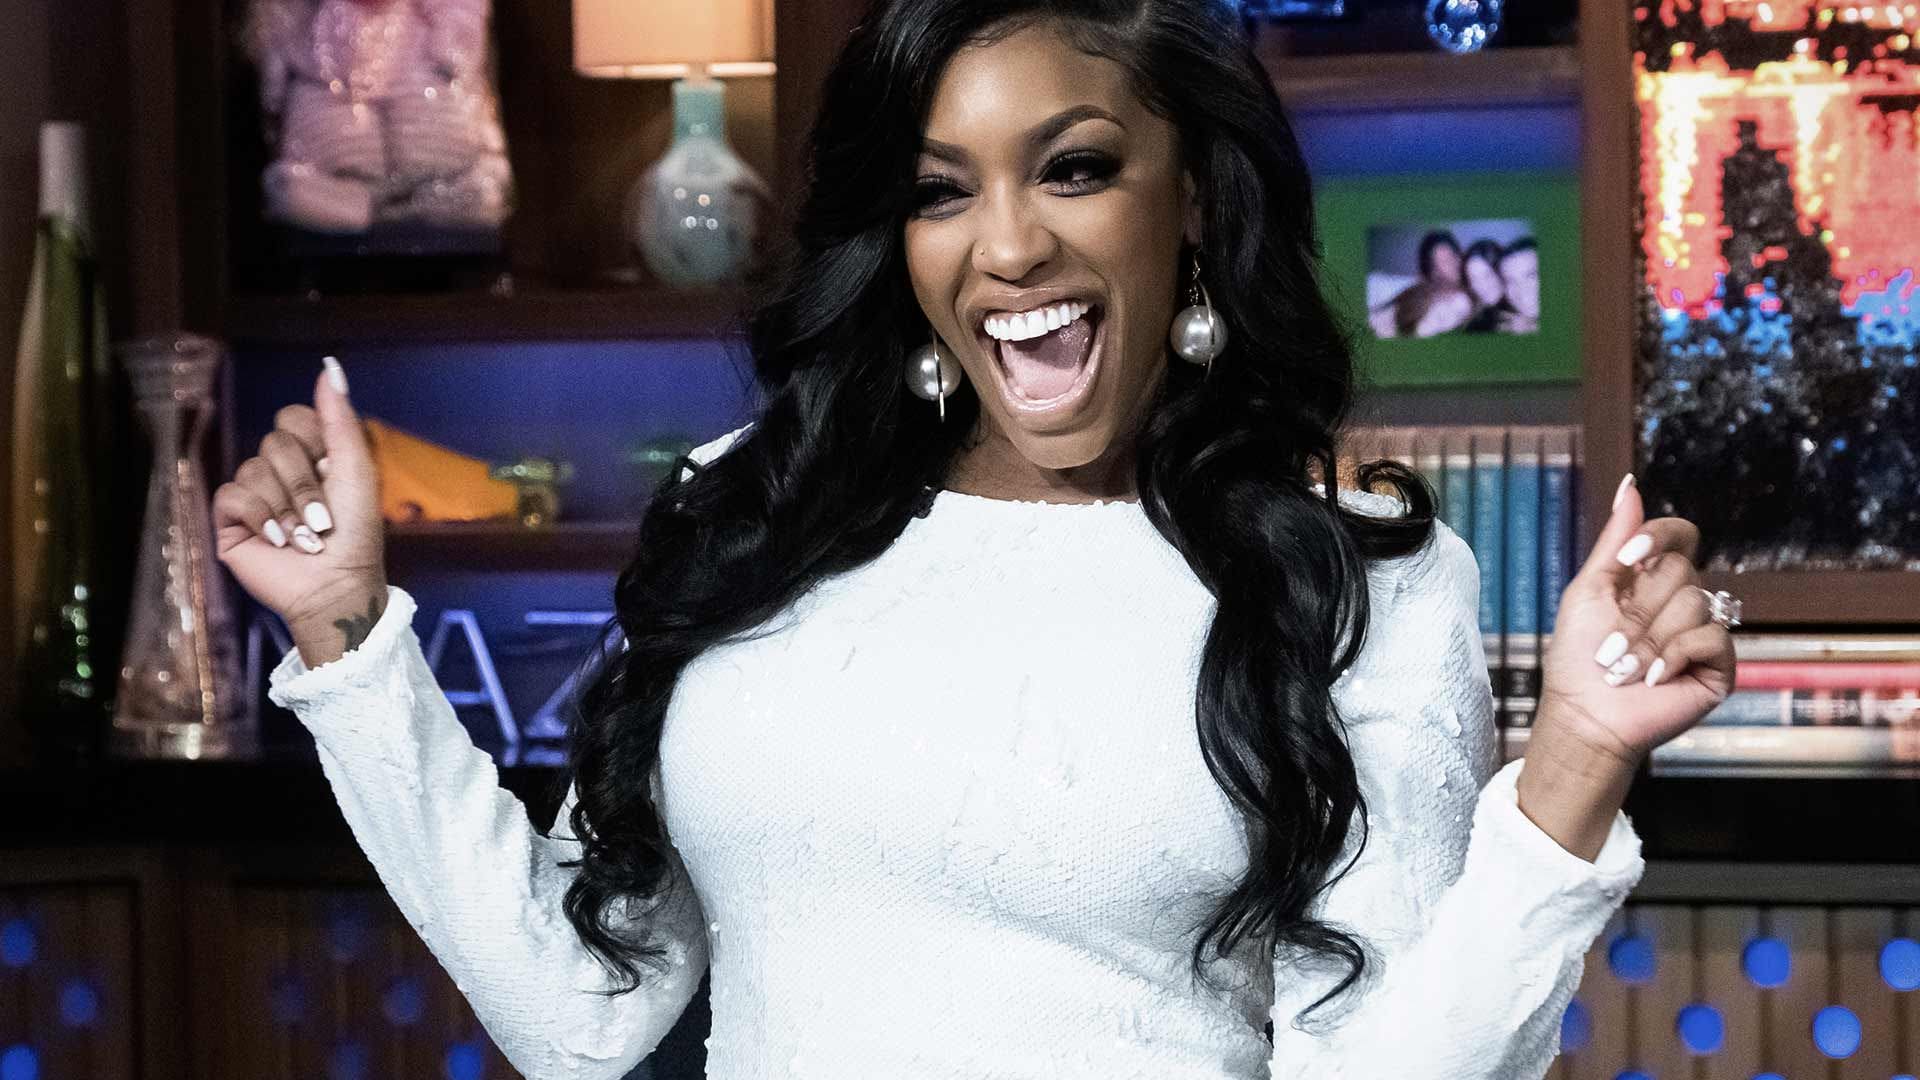 Porsha Williams' Latest Posts Have Fans Saying That She Could Not Look Happier